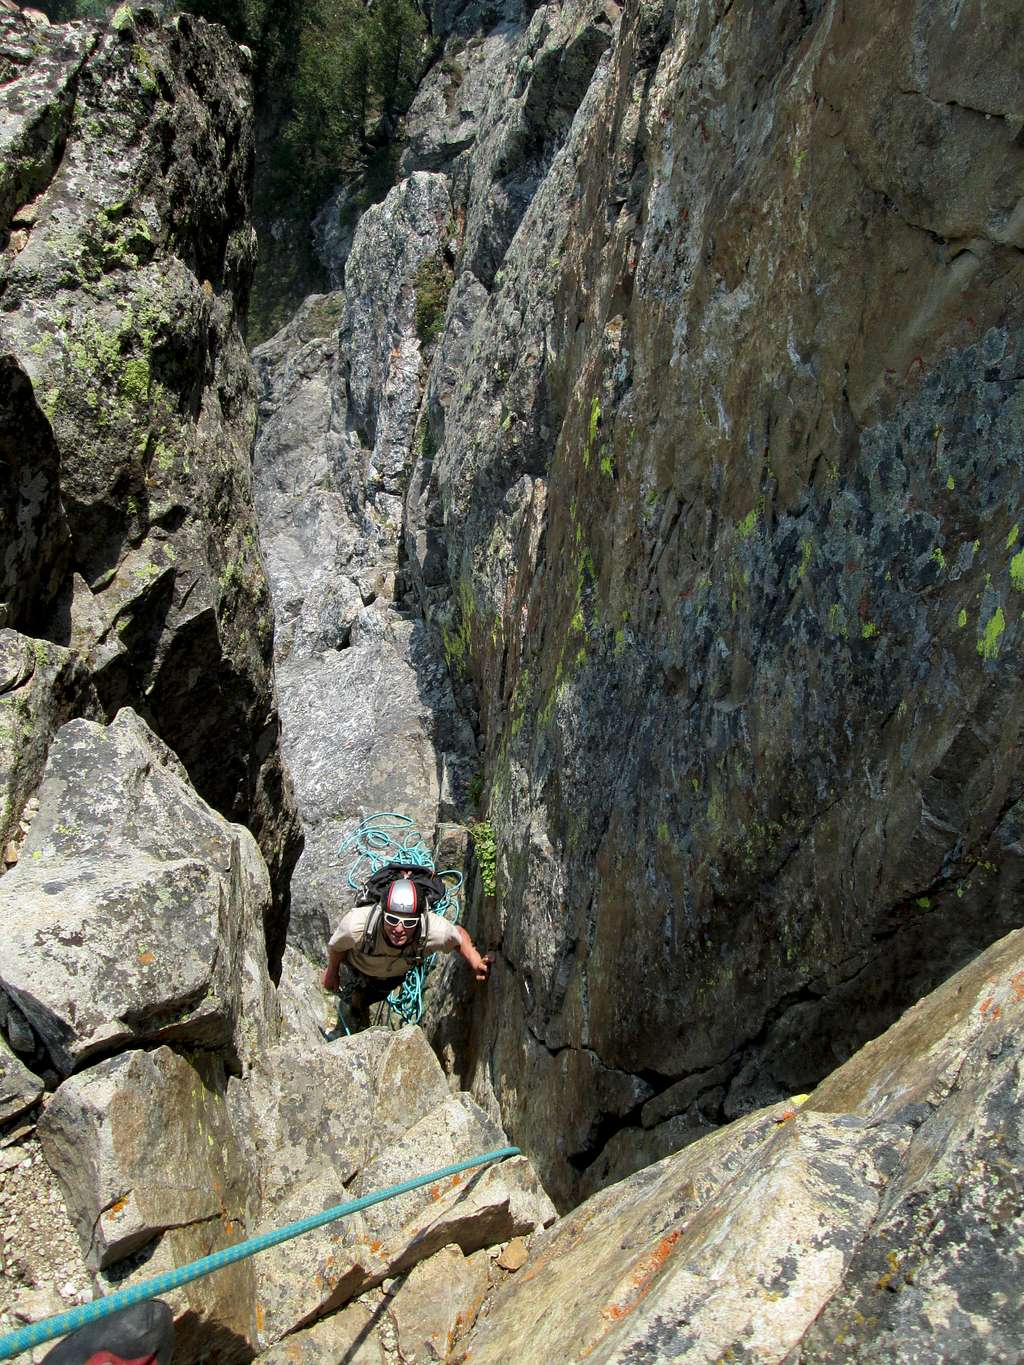 Looking down the chimney on pitch 4 of the South Ridge/Face of Baxter's Pinnacle, Teton Range, WY